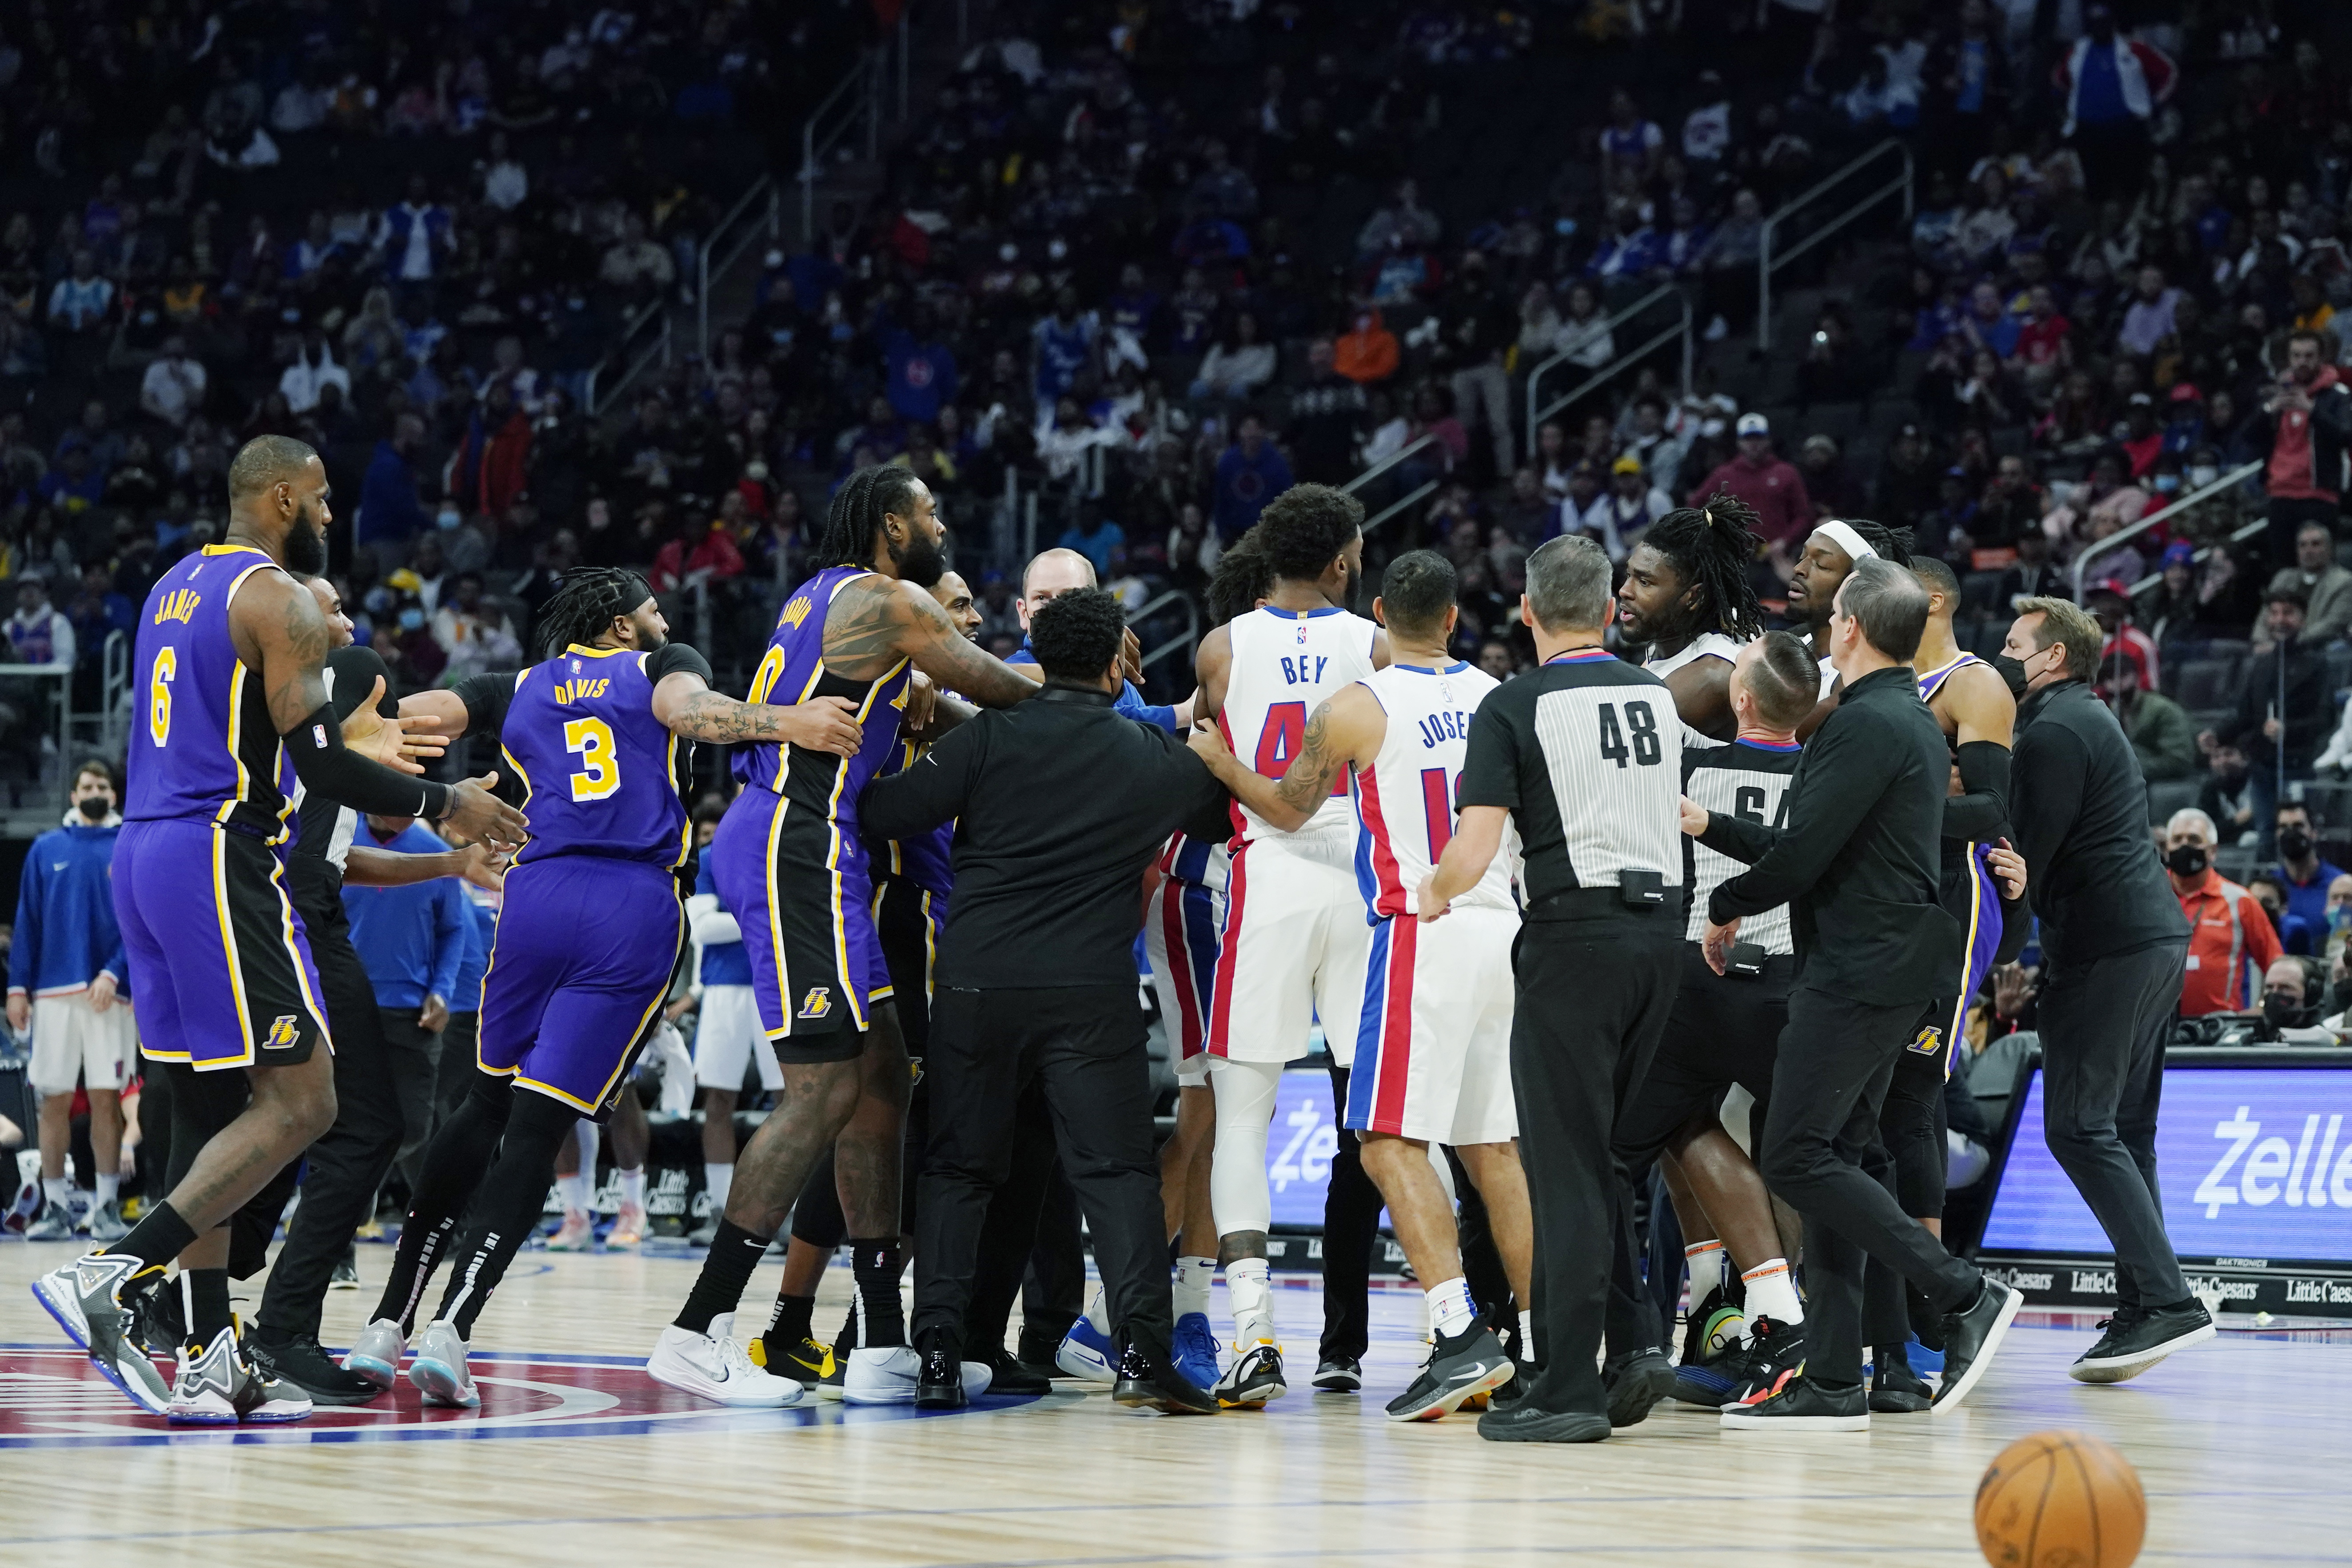 Detroit Pistons lose to Lakers after Isaiah Stewart-LeBron fracas